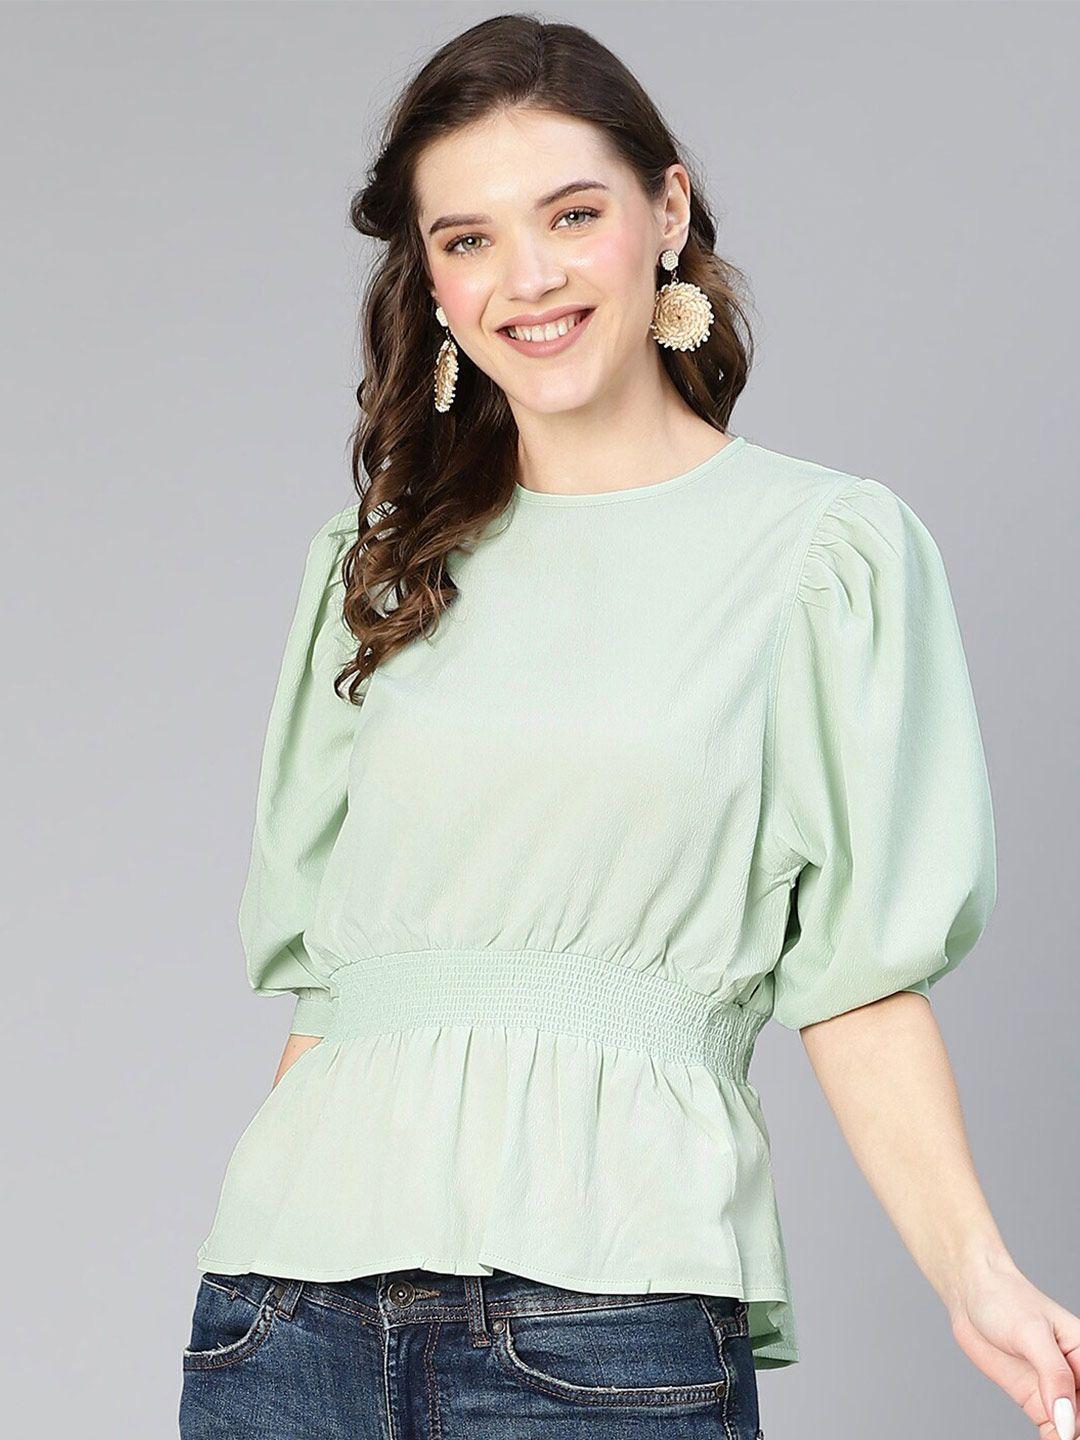 oxolloxo-cinched-waist-puff-sleeves-top